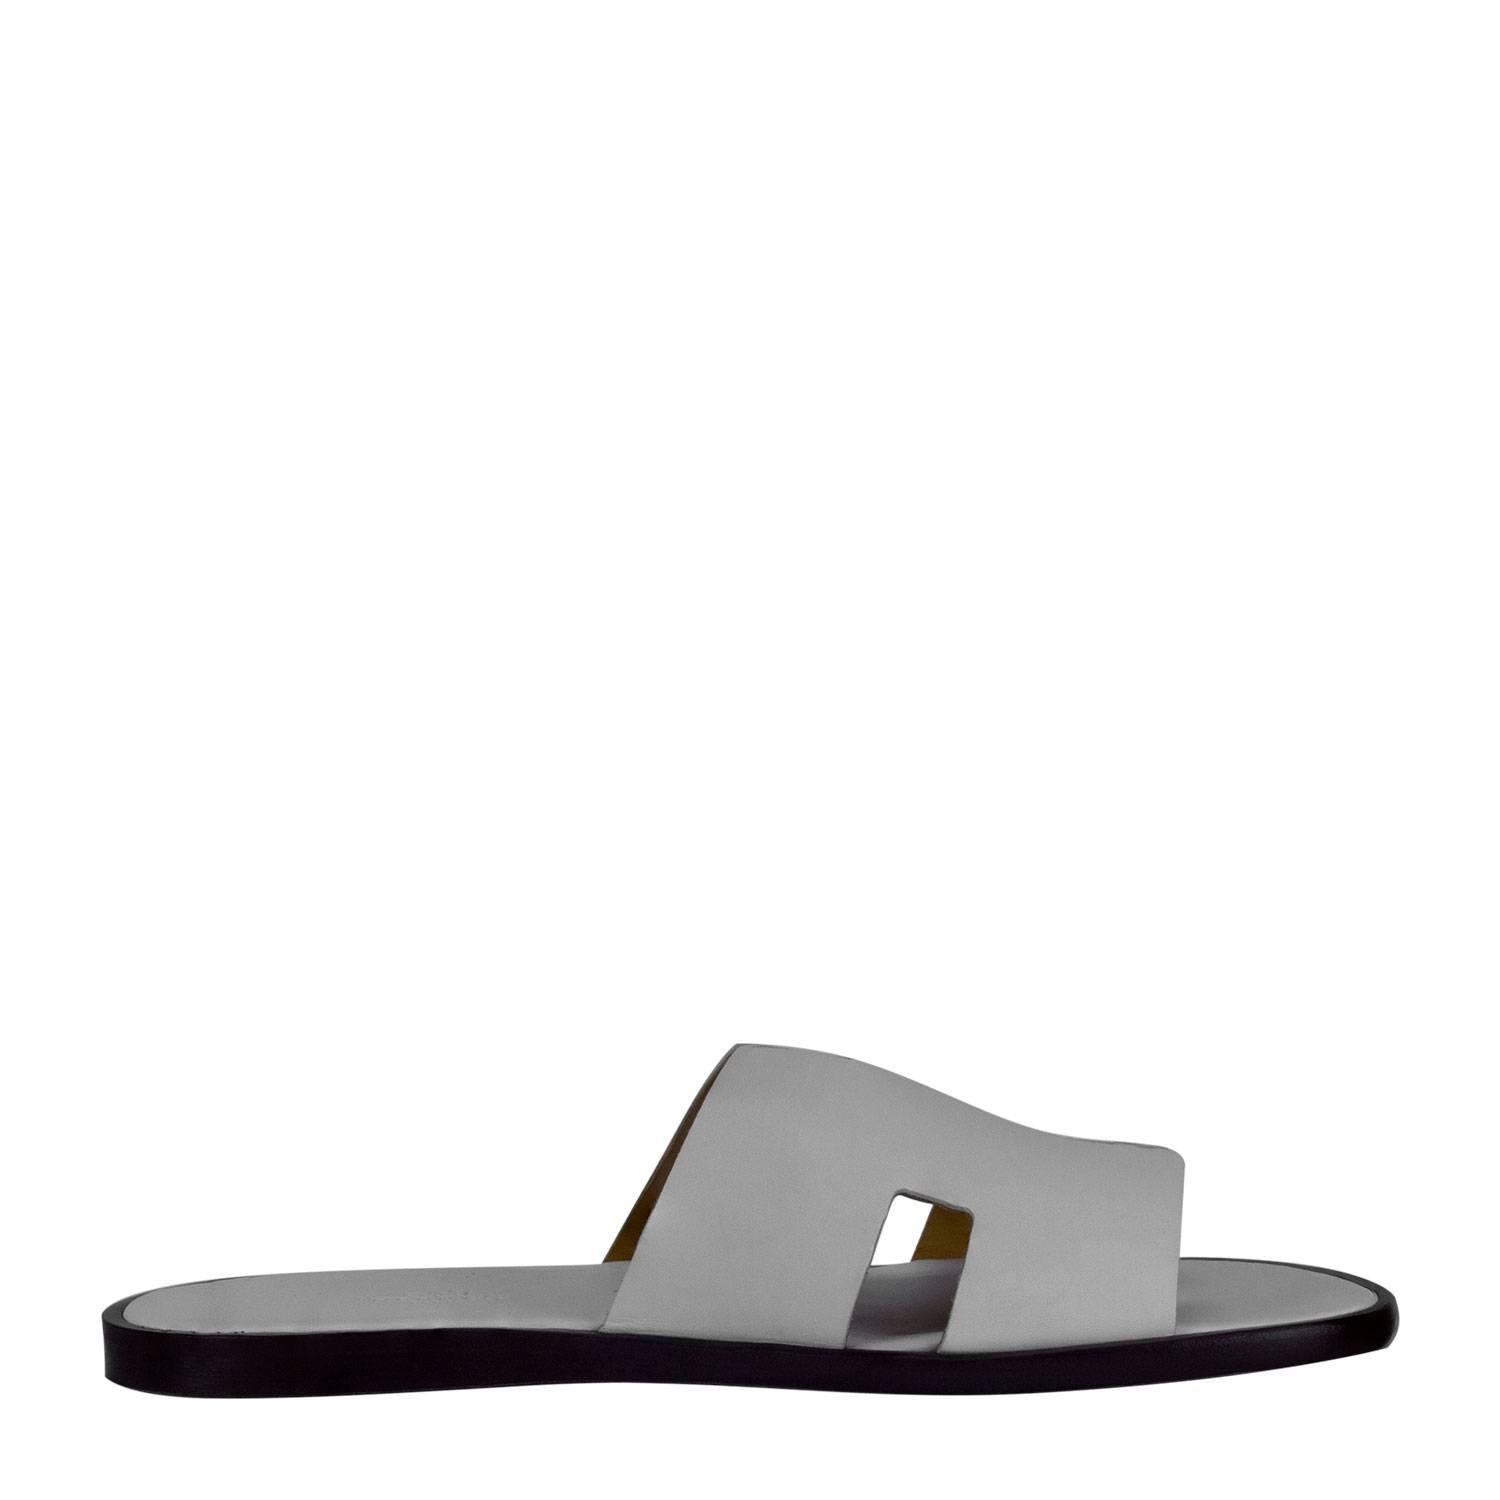 Hermes Men's Sandals Izmir Veau Leather White Color 43 Size 2016

Pre-owned and never used.

Bought it in Hermes store in 2016.

The price of this item on Boutique Hermes is $710.00.

Composition: Leather.

Model: Izmir.

Size: 43 EU /